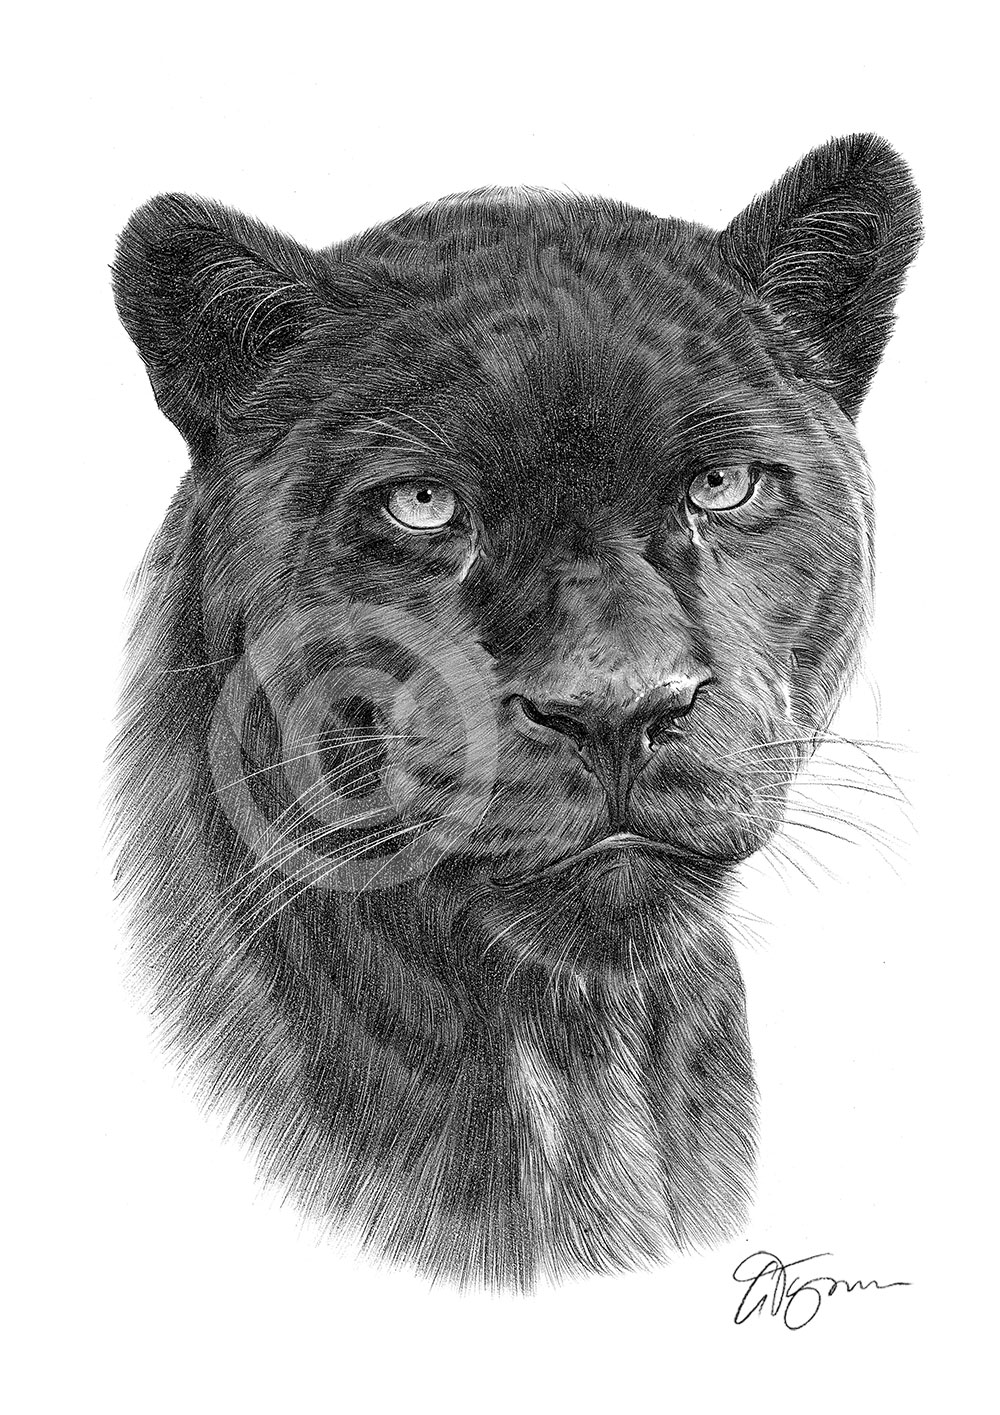 BLACK PANTHER pencil drawing art print A4/A3 sizes african wildlife